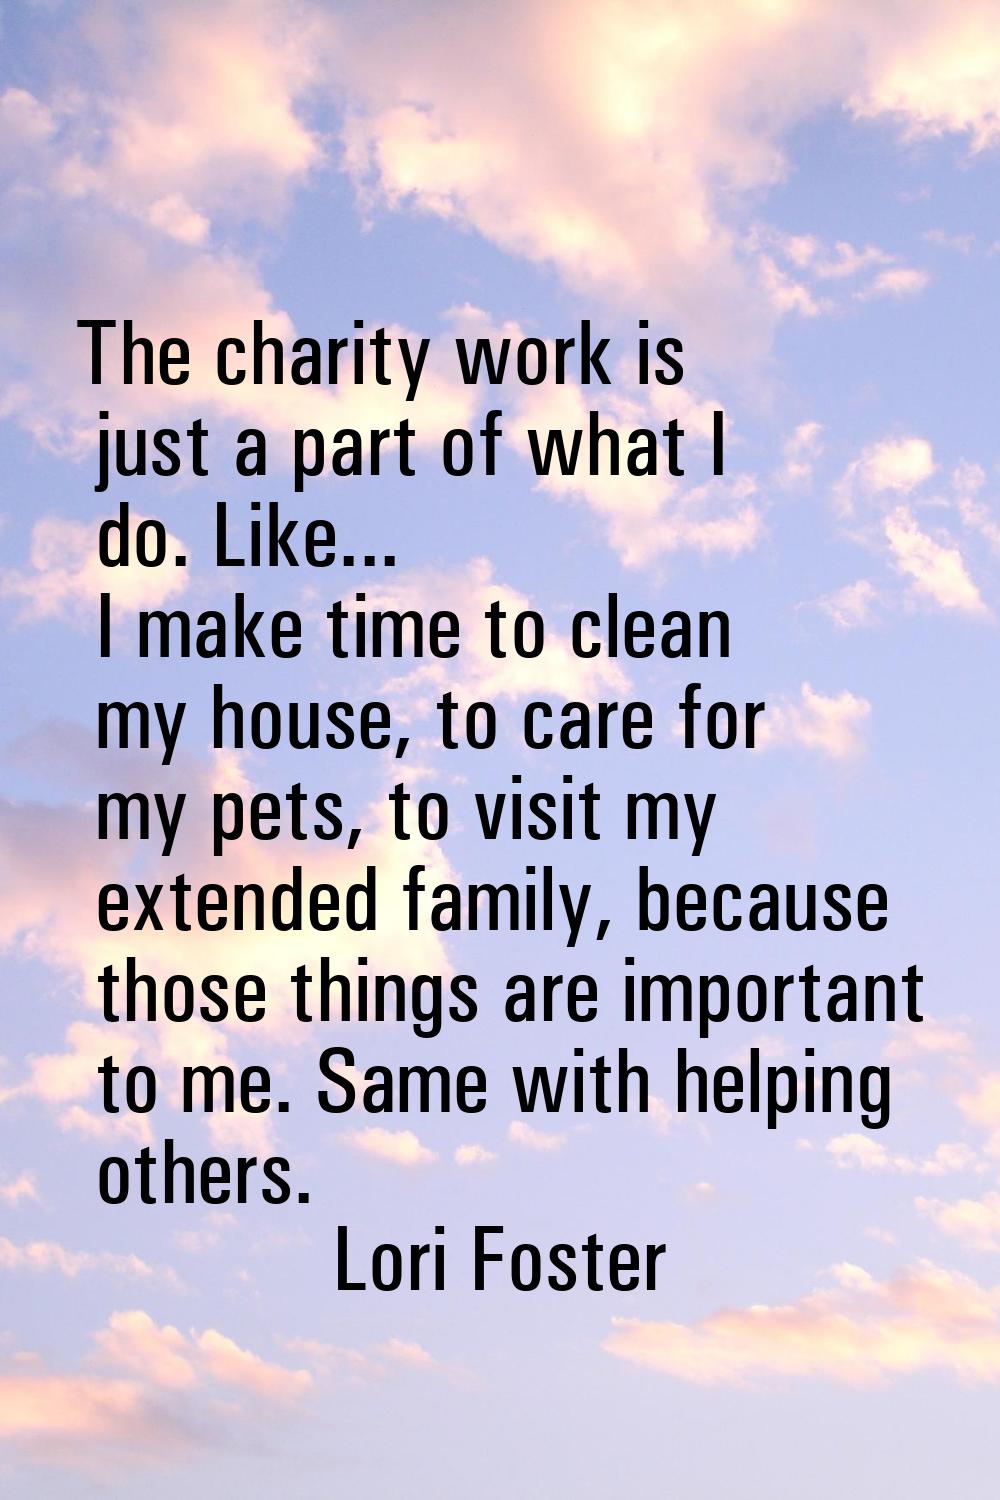 The charity work is just a part of what I do. Like... I make time to clean my house, to care for my